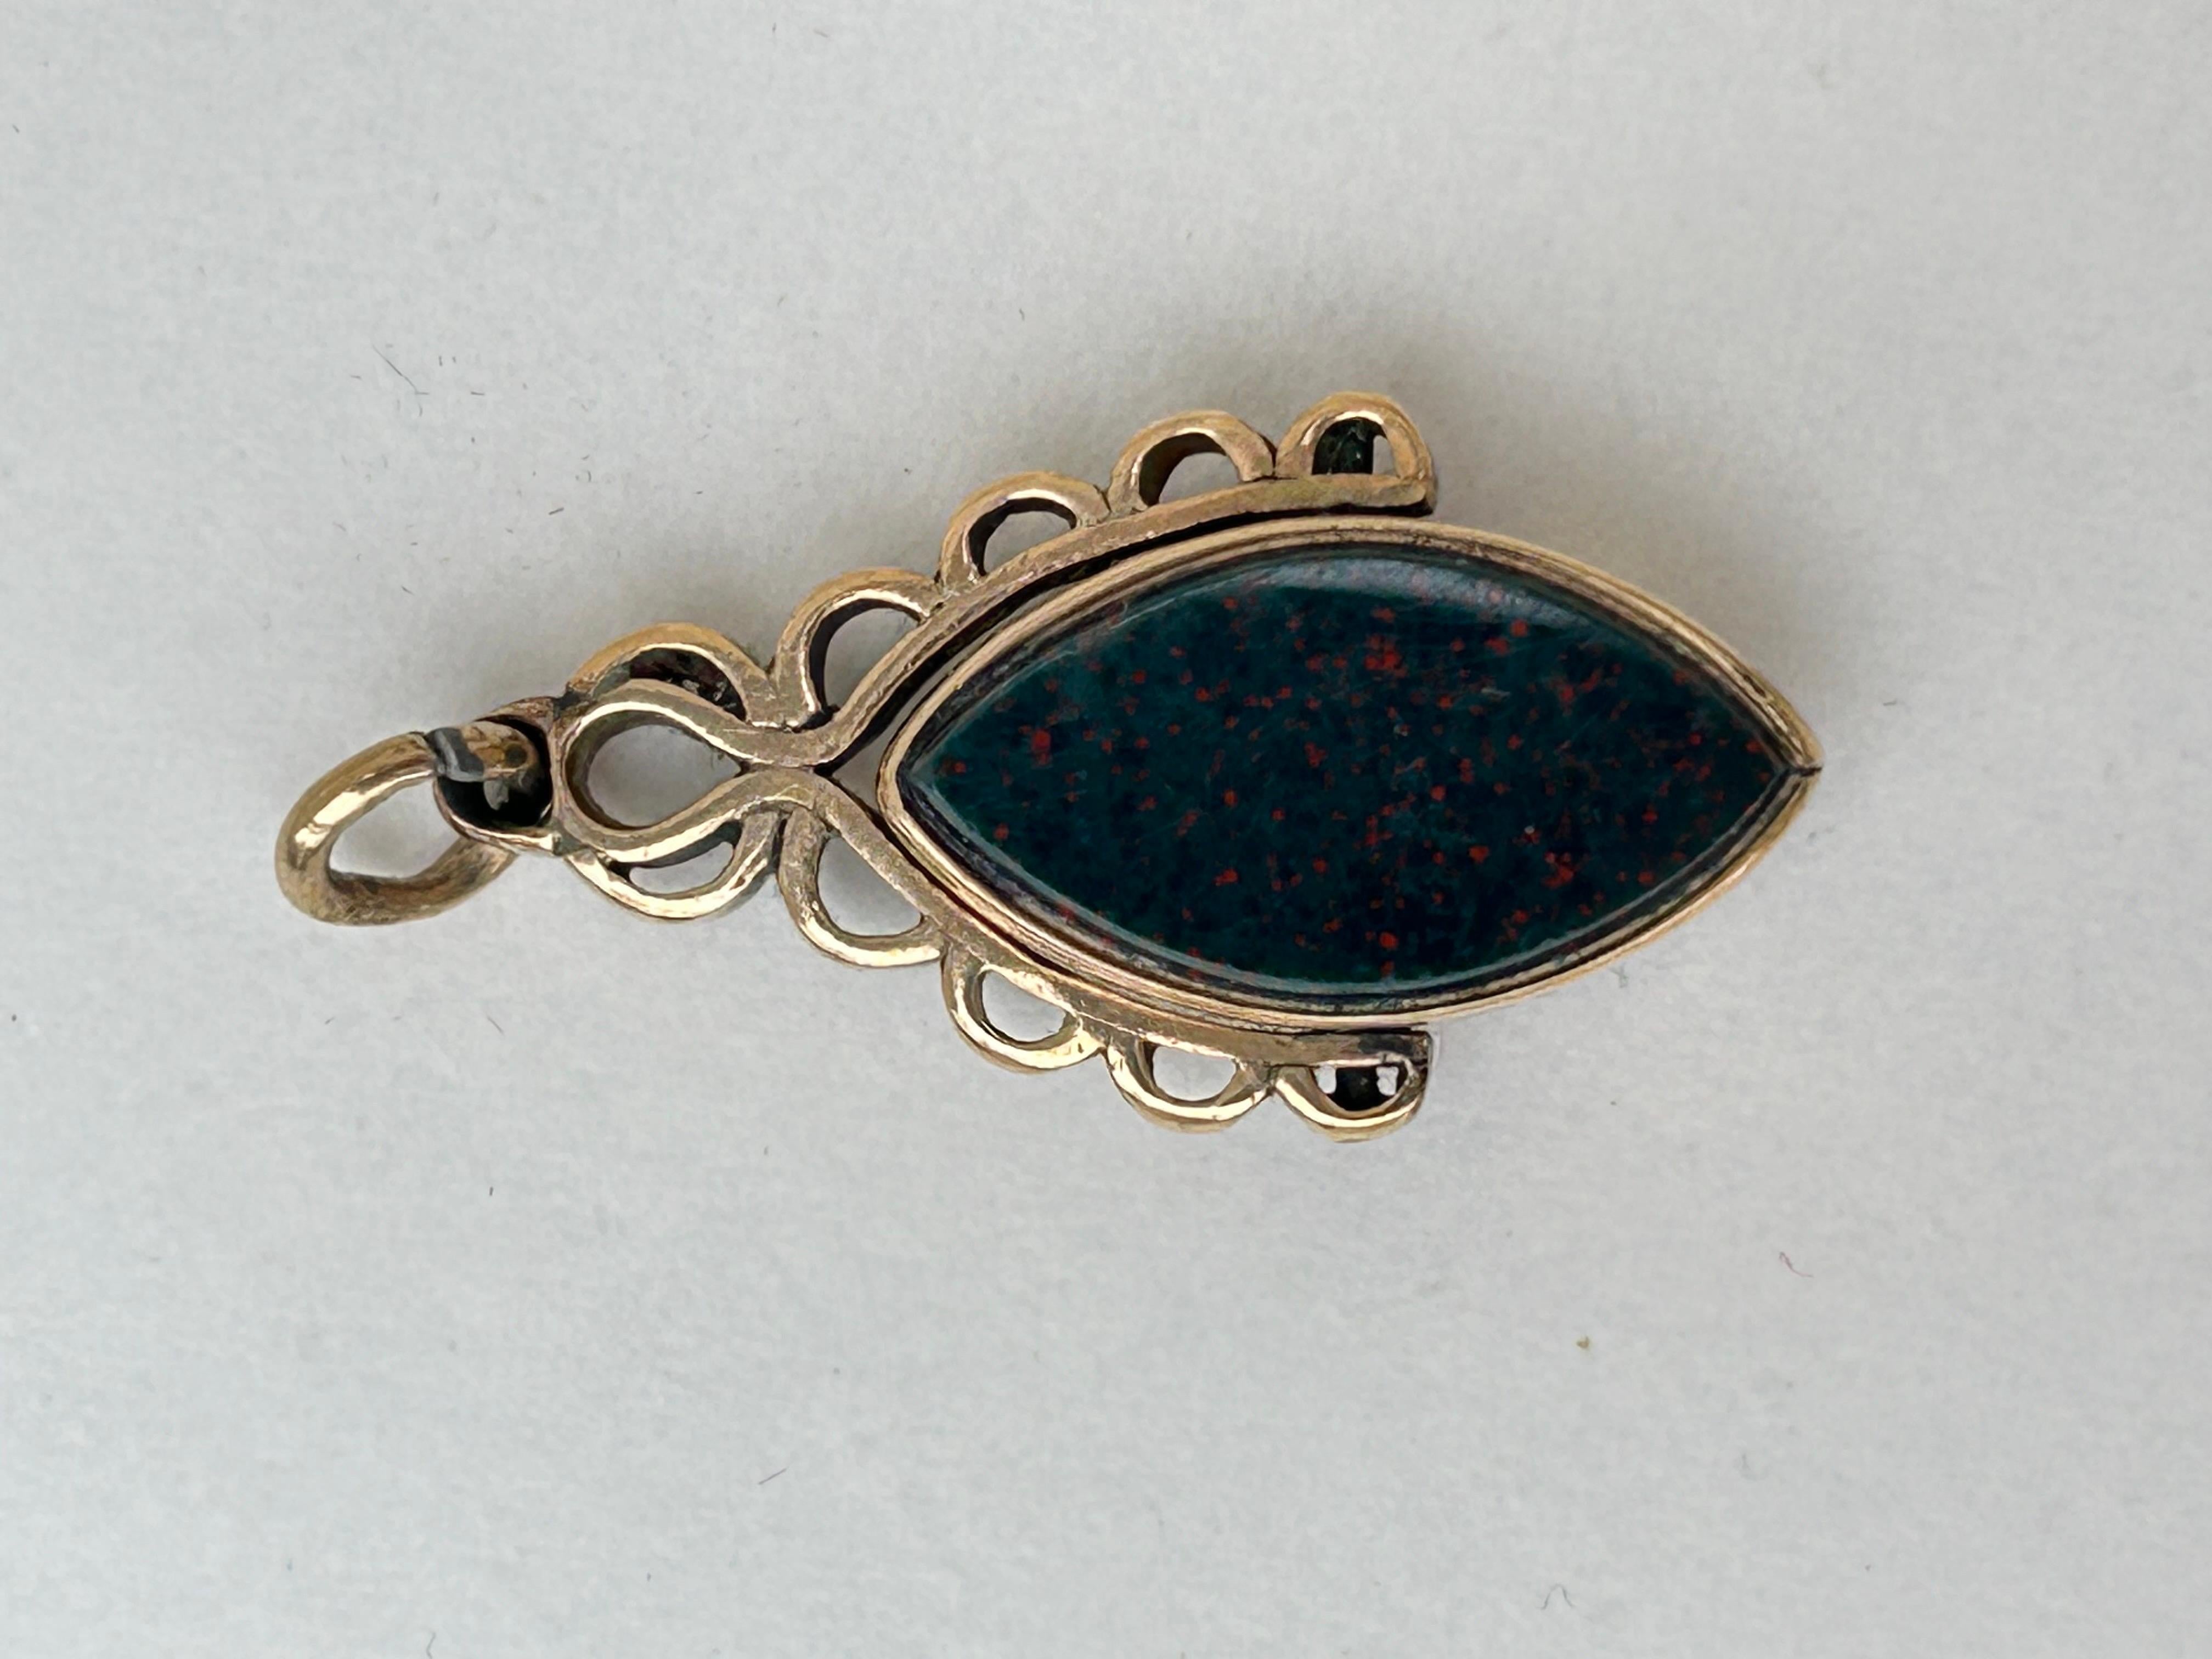 Antique Carnelian and Bloodstone 9ct Yellow Gold Spinning Fob Pendant 

wonderful chunky spinning fob! 

The item comes without the box in the photos but will be presented in a gembank1973 gift box
 
Measurements: Weight 7.09g, length 33mm, width